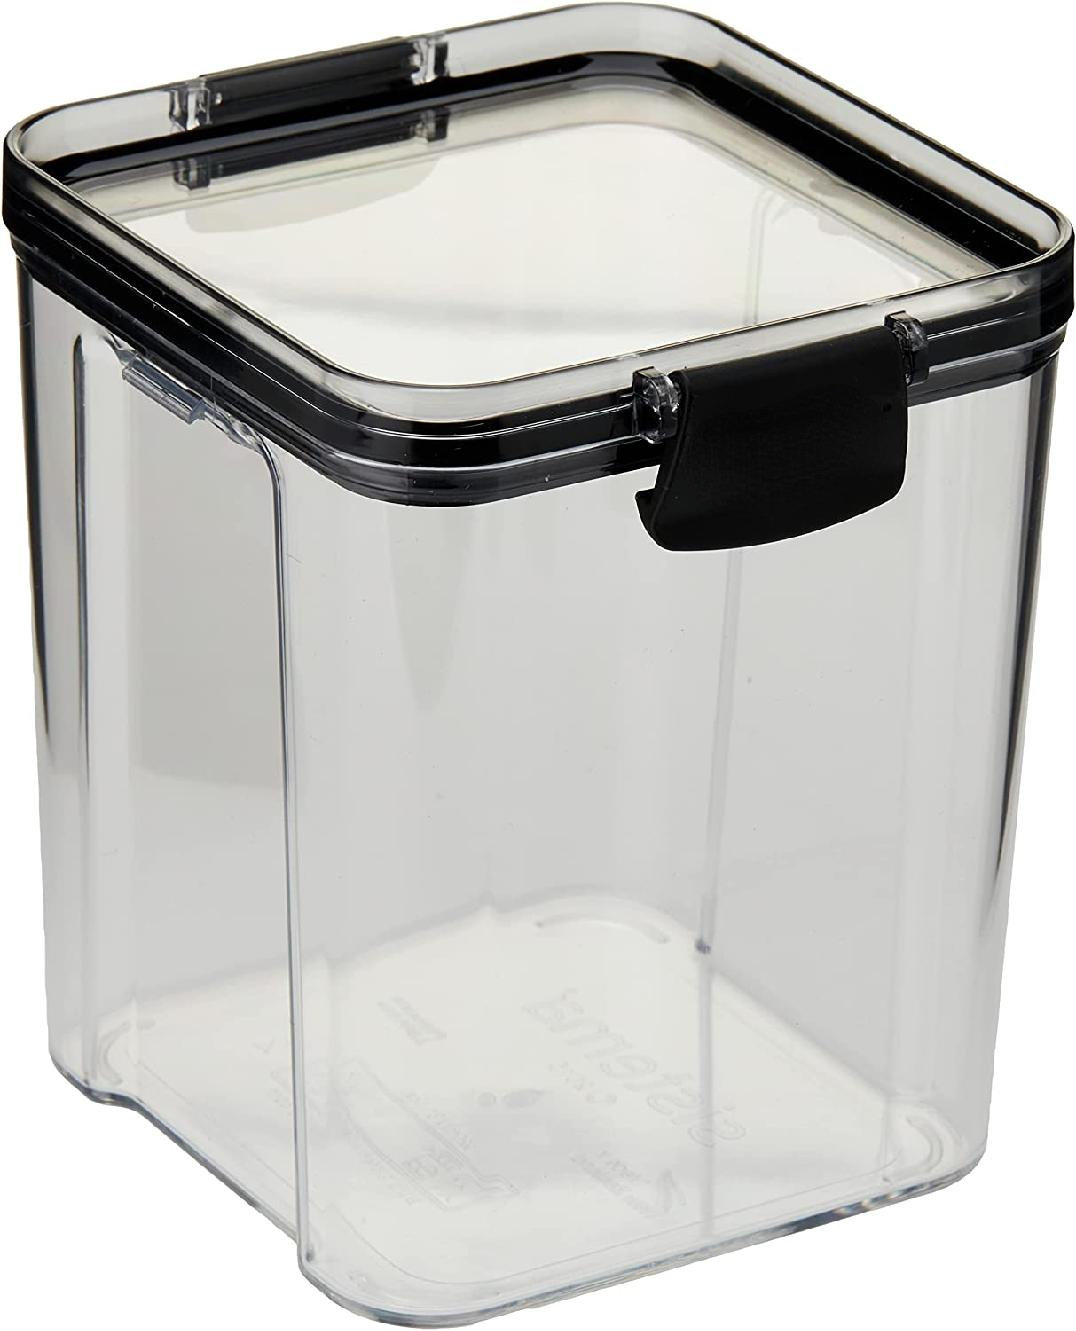 Prep & Savour Blinkhorn Disposable Plastic Food Container for 100 Guests